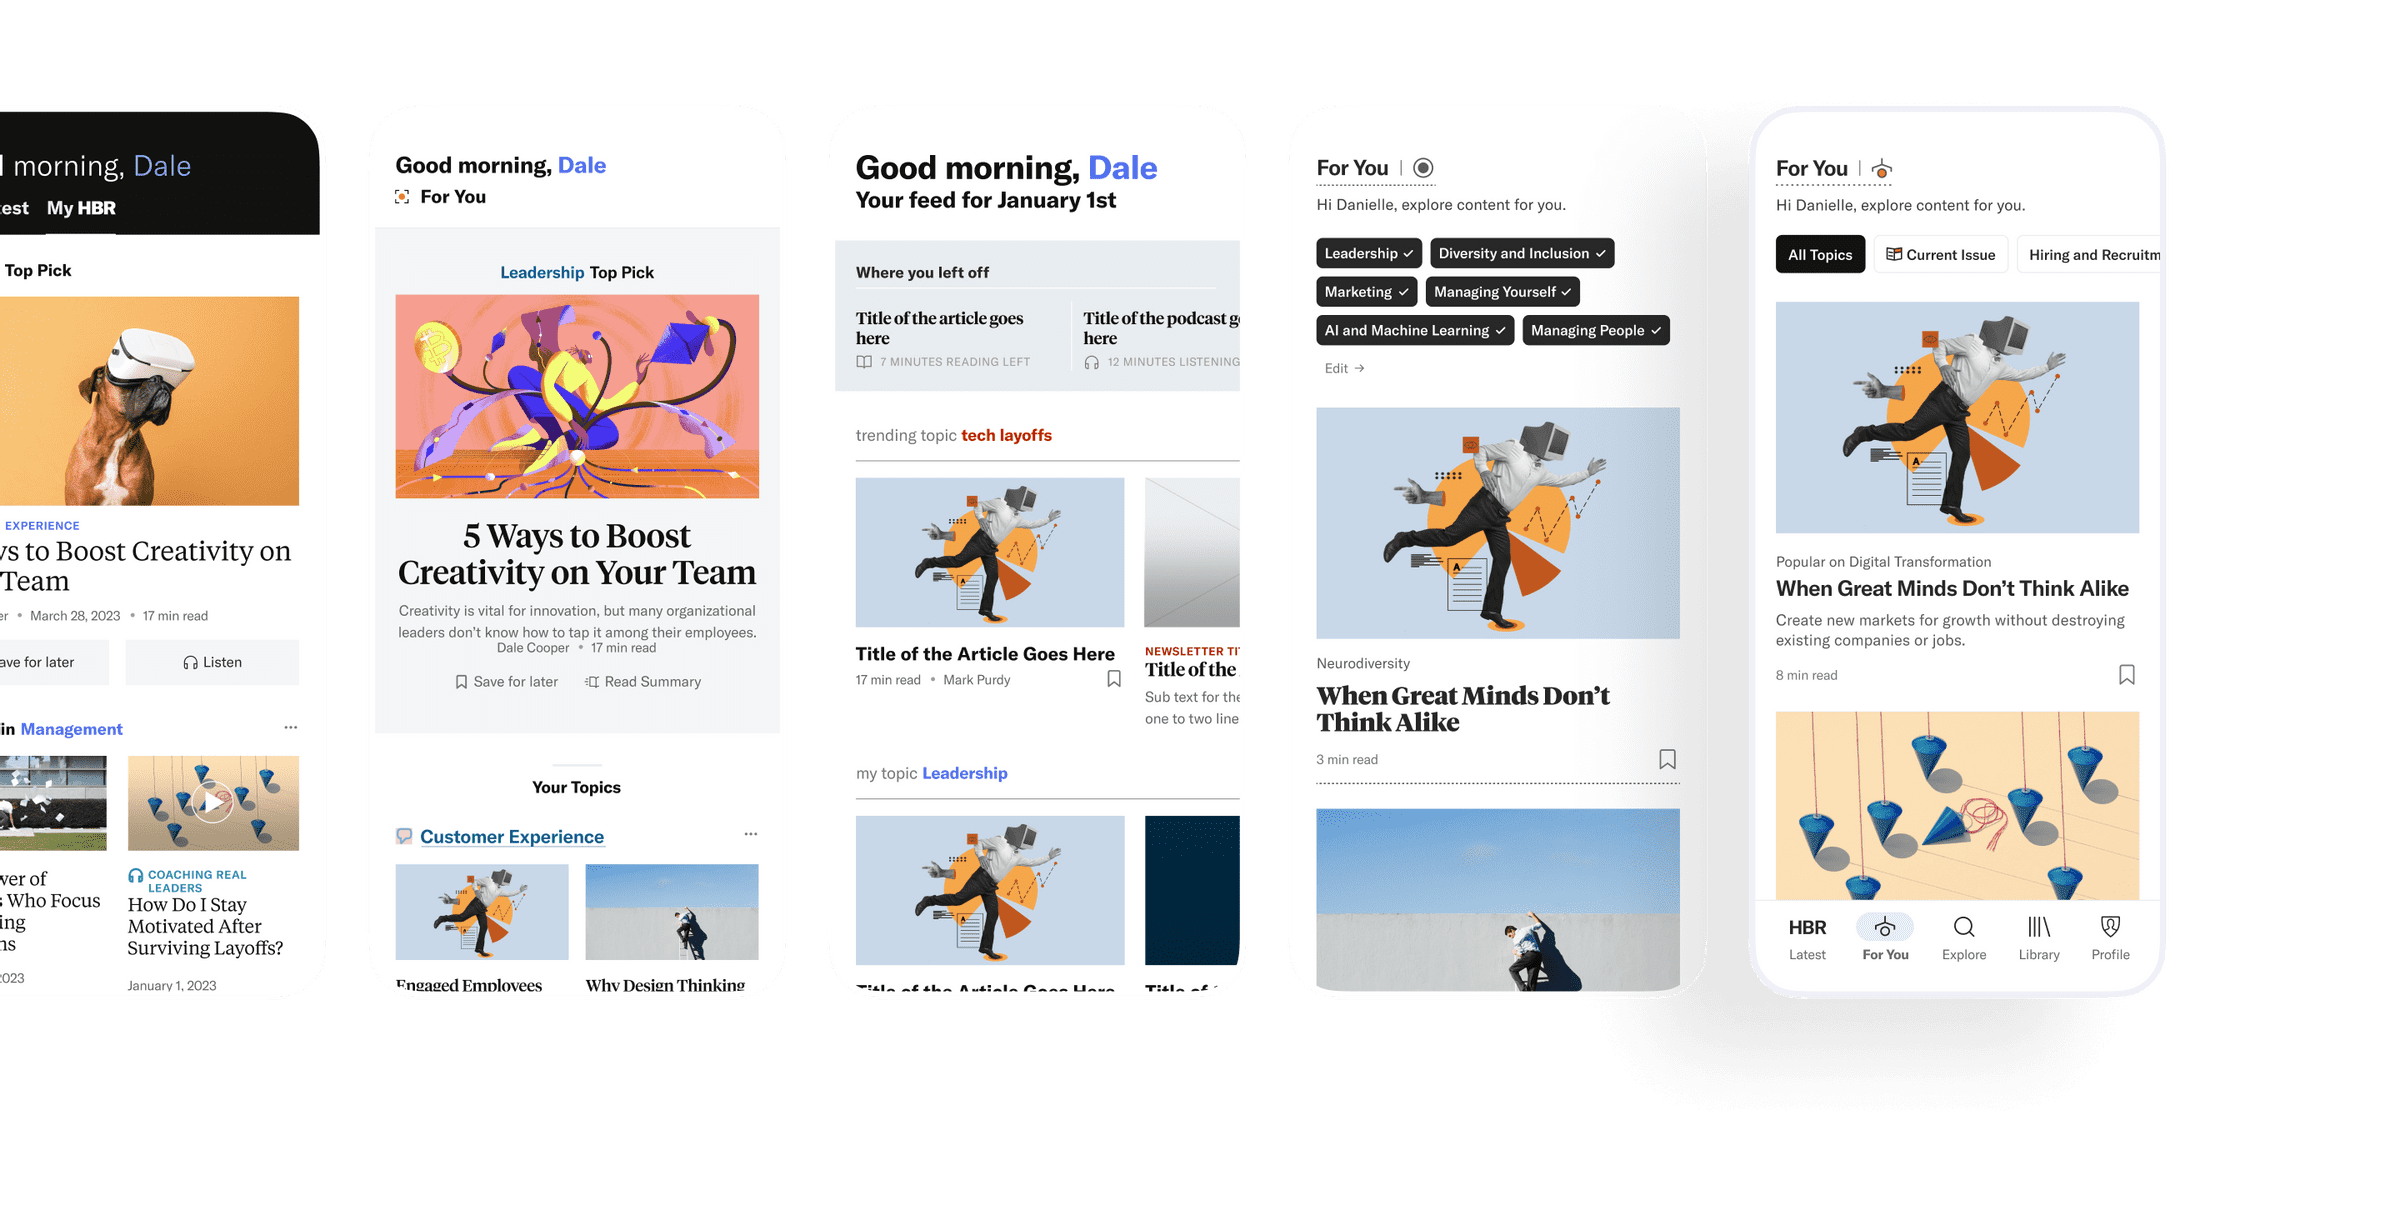 Iteration of the design of the HBR mobile app homepage. Showing different layouts and concepts.